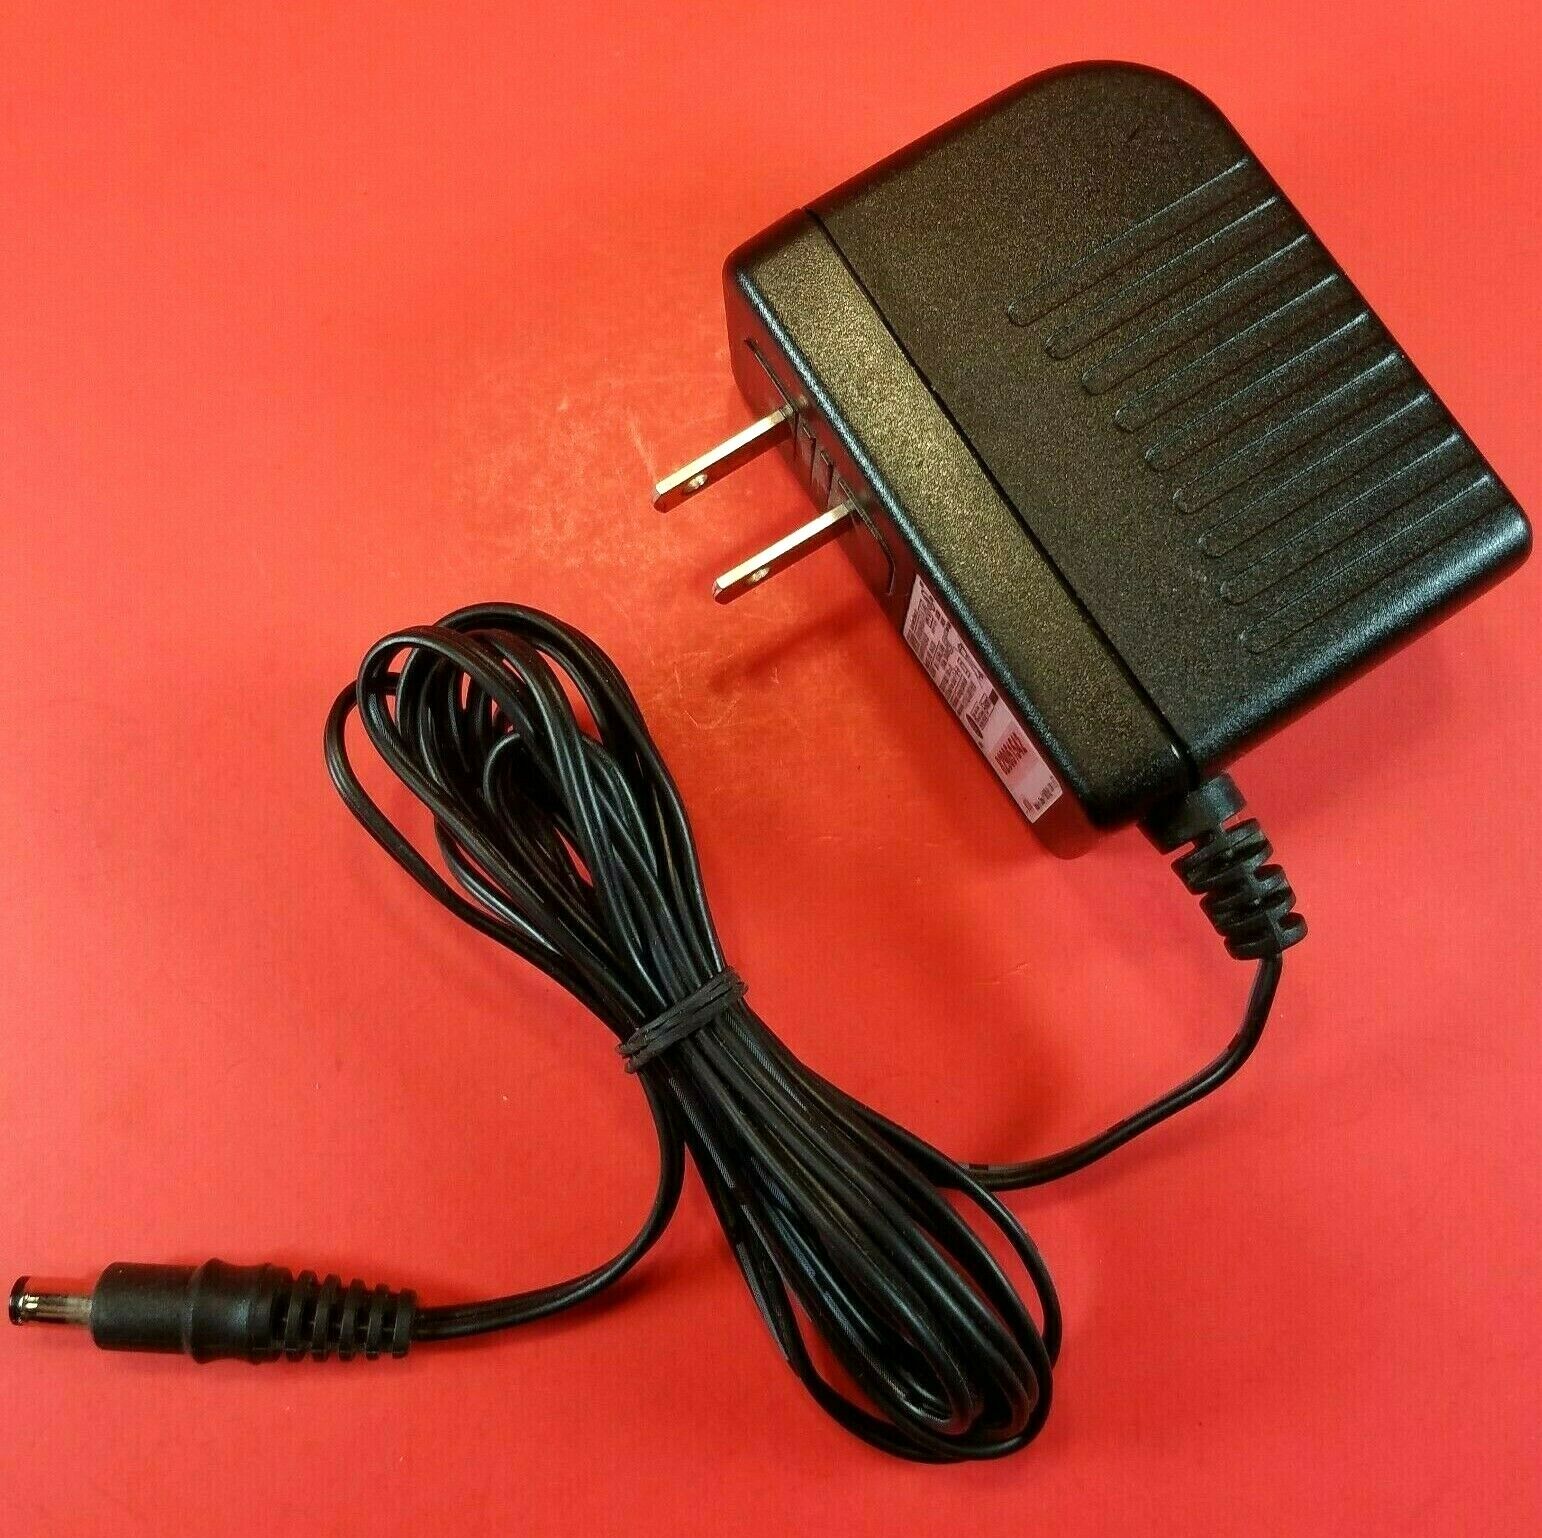 APD WA-24C12U Power Supply Adaptor 12V - 2A OEM AC Adapter Charger Cord Cable Type: AC Adapter Output Voltage: 12 V Fe - Click Image to Close